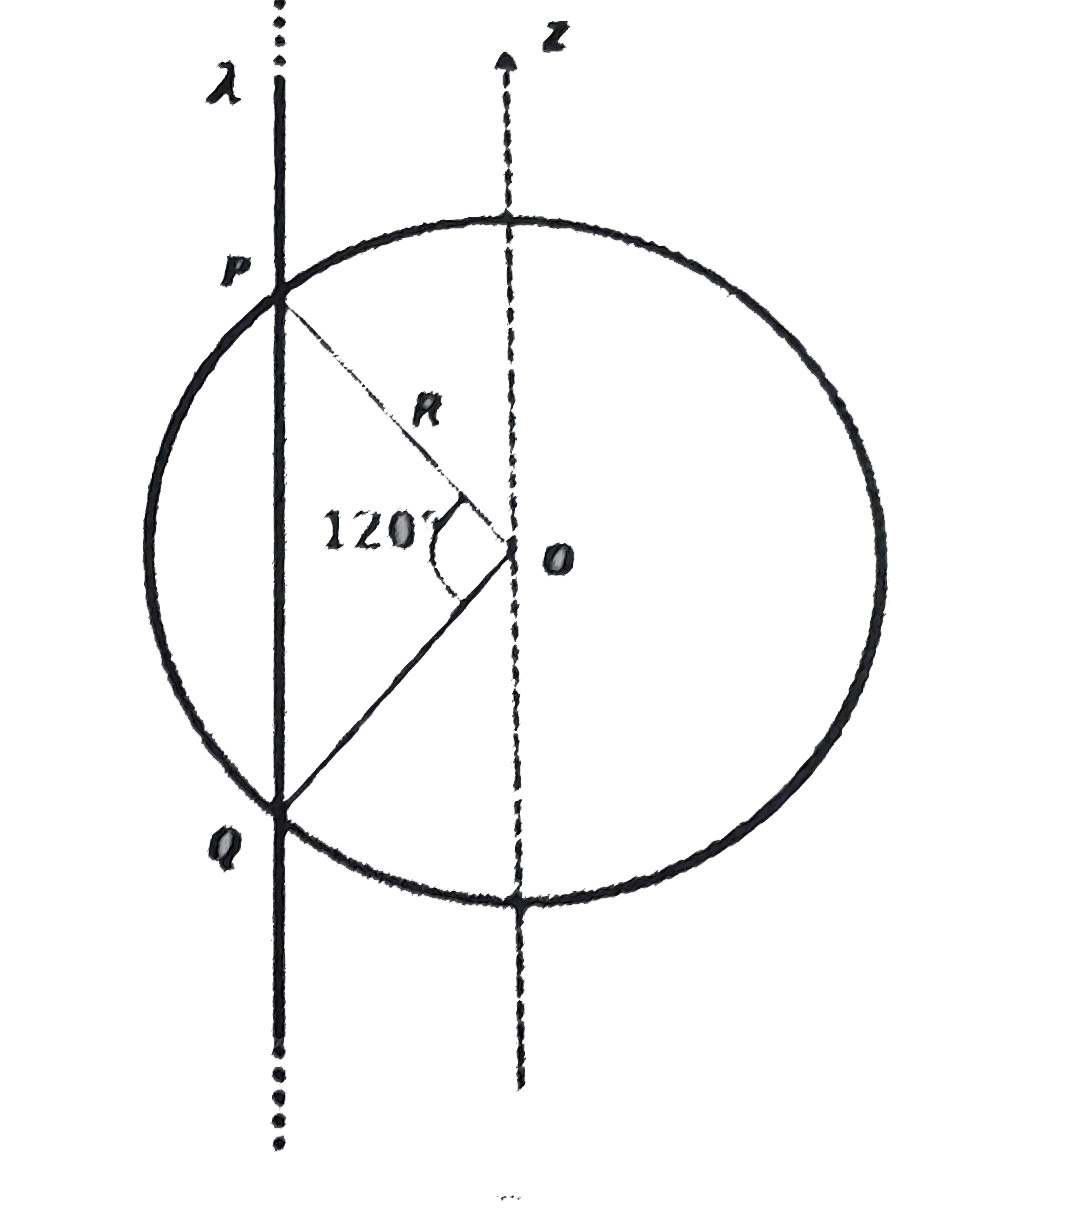 An infinitely long thin non-conduction wire is parallel to the z-axis and carries a uniform line charge density lambda. It pierces a thin non-conducting spherical shell of radius r in such a way that that the are PQ subtends an angle 120^(@) at the centre O of the spherical shell, as shown in the figure. The permittivity of free space is epsi(0). which of the following statements is (are) true ?